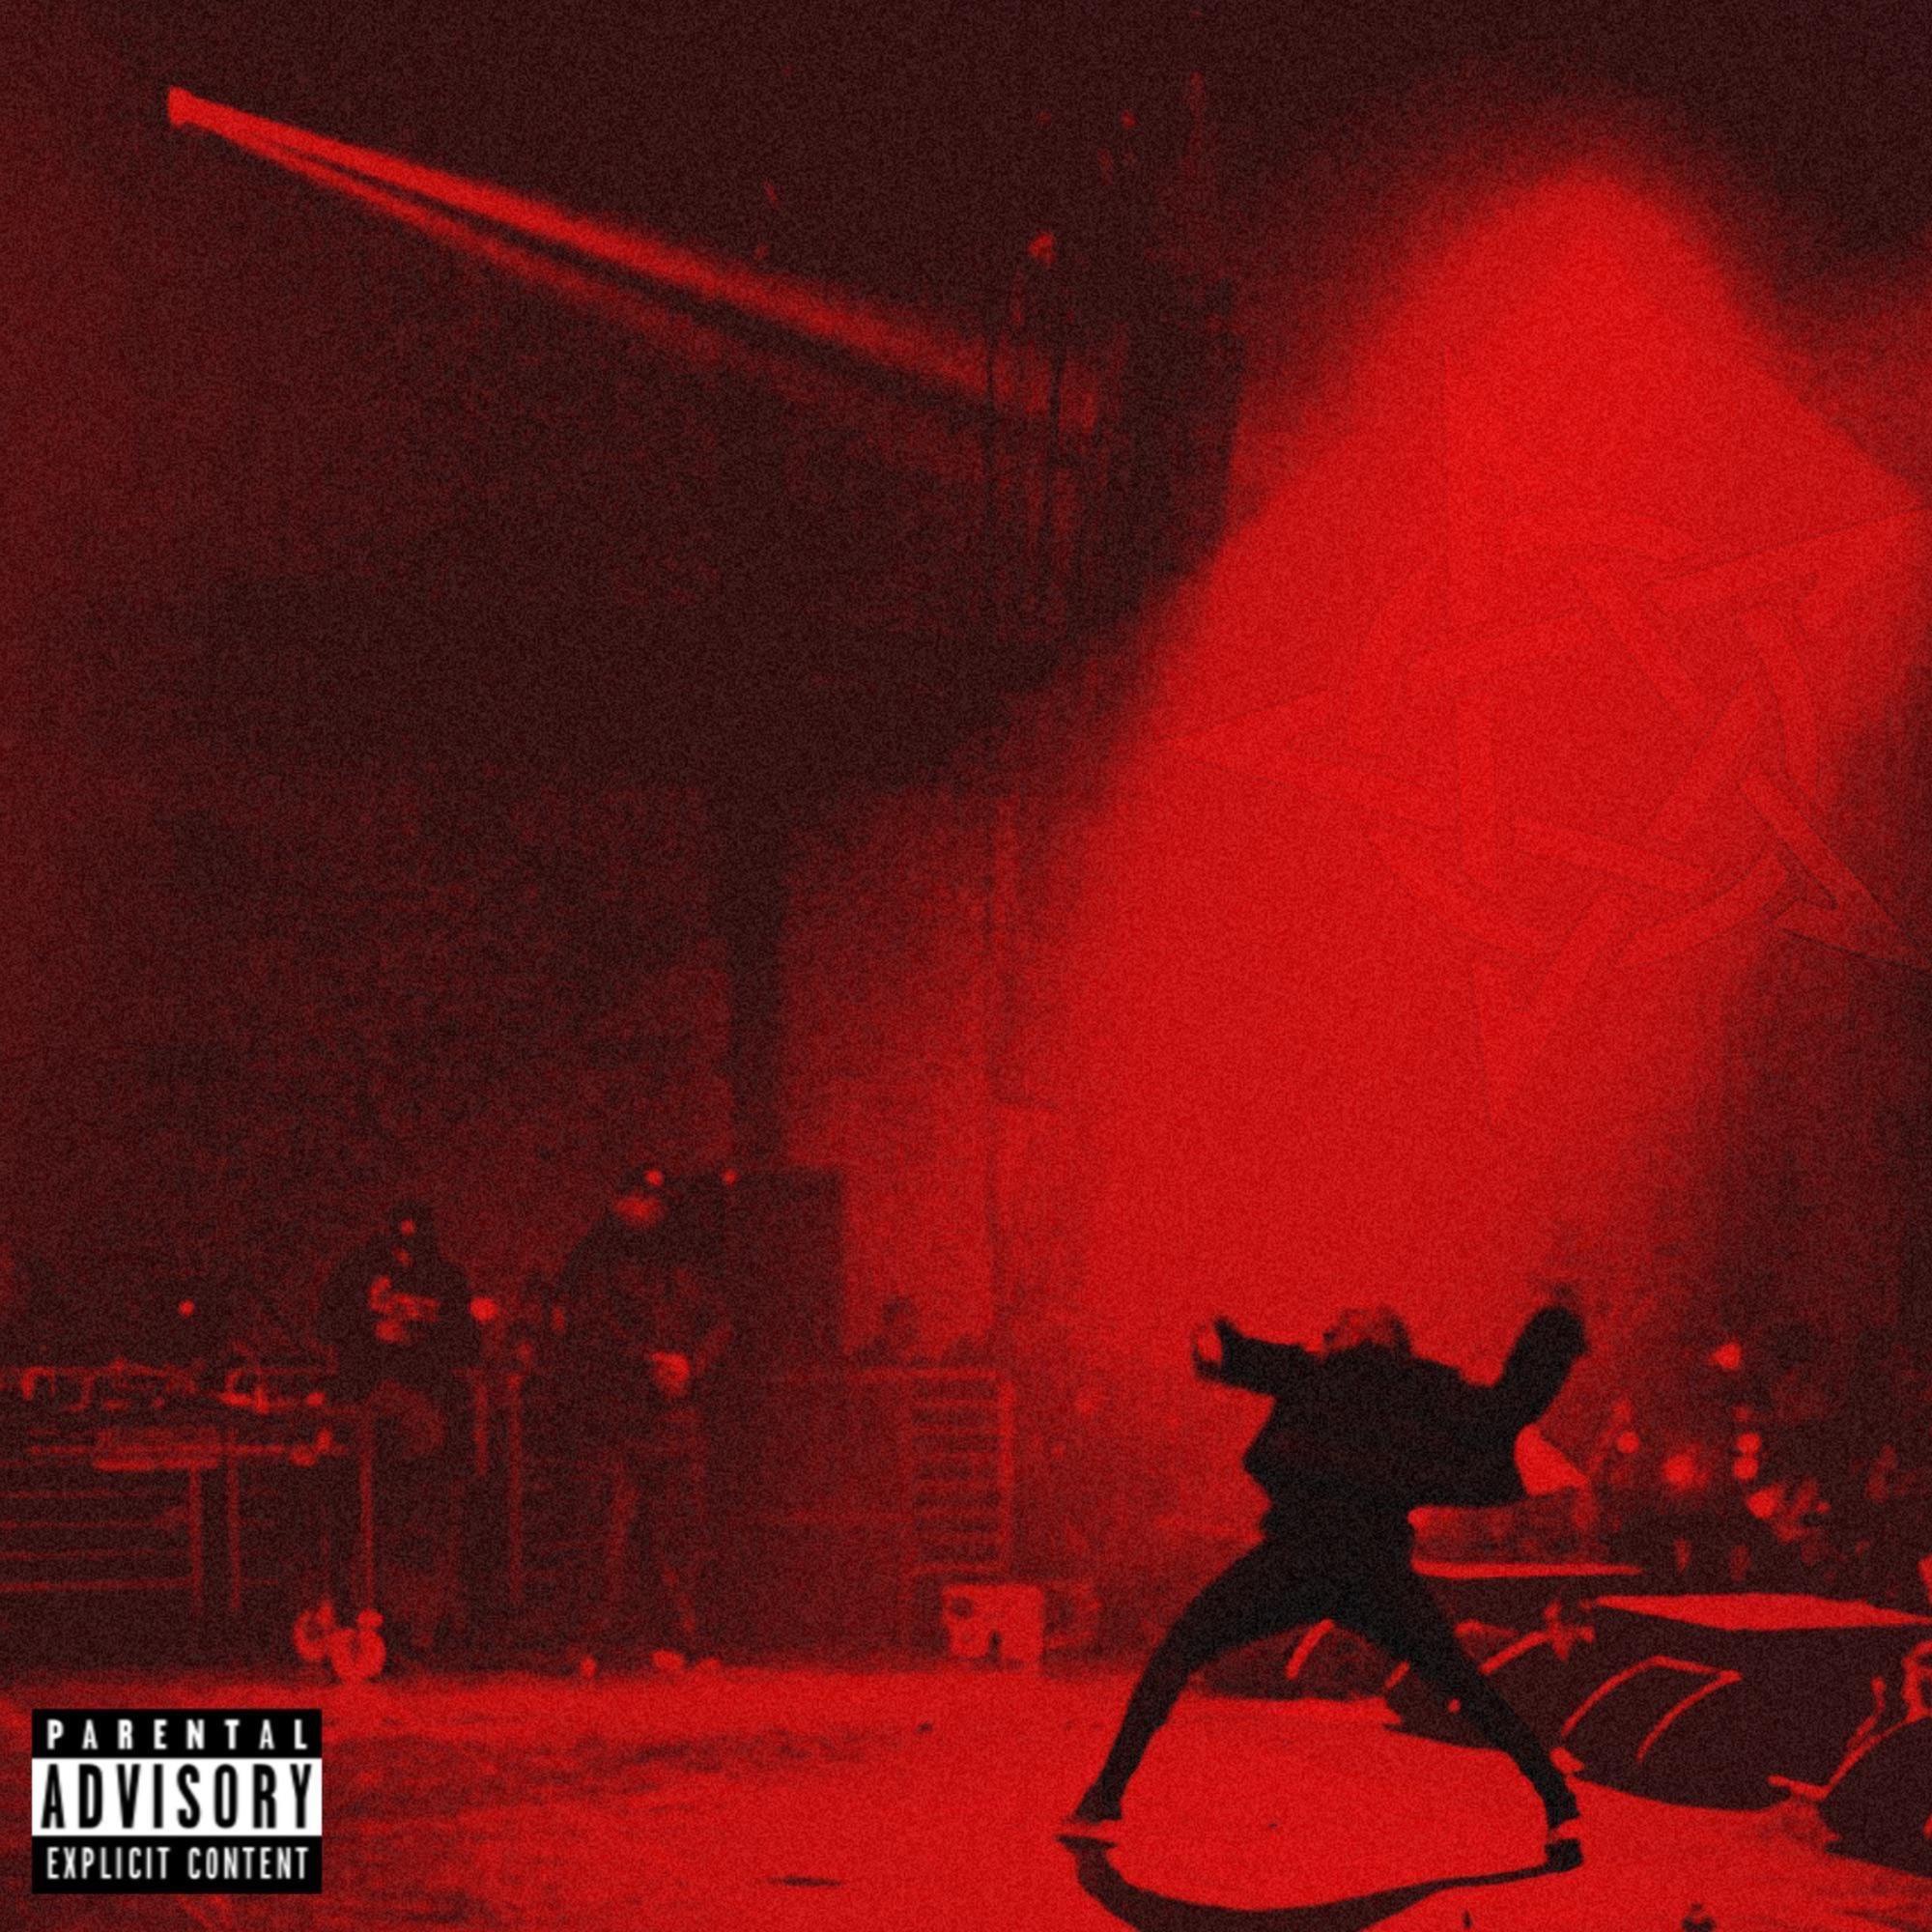 Playboi Carti - Whole Lotta Red review by MysteryBFDI - Album of The Year